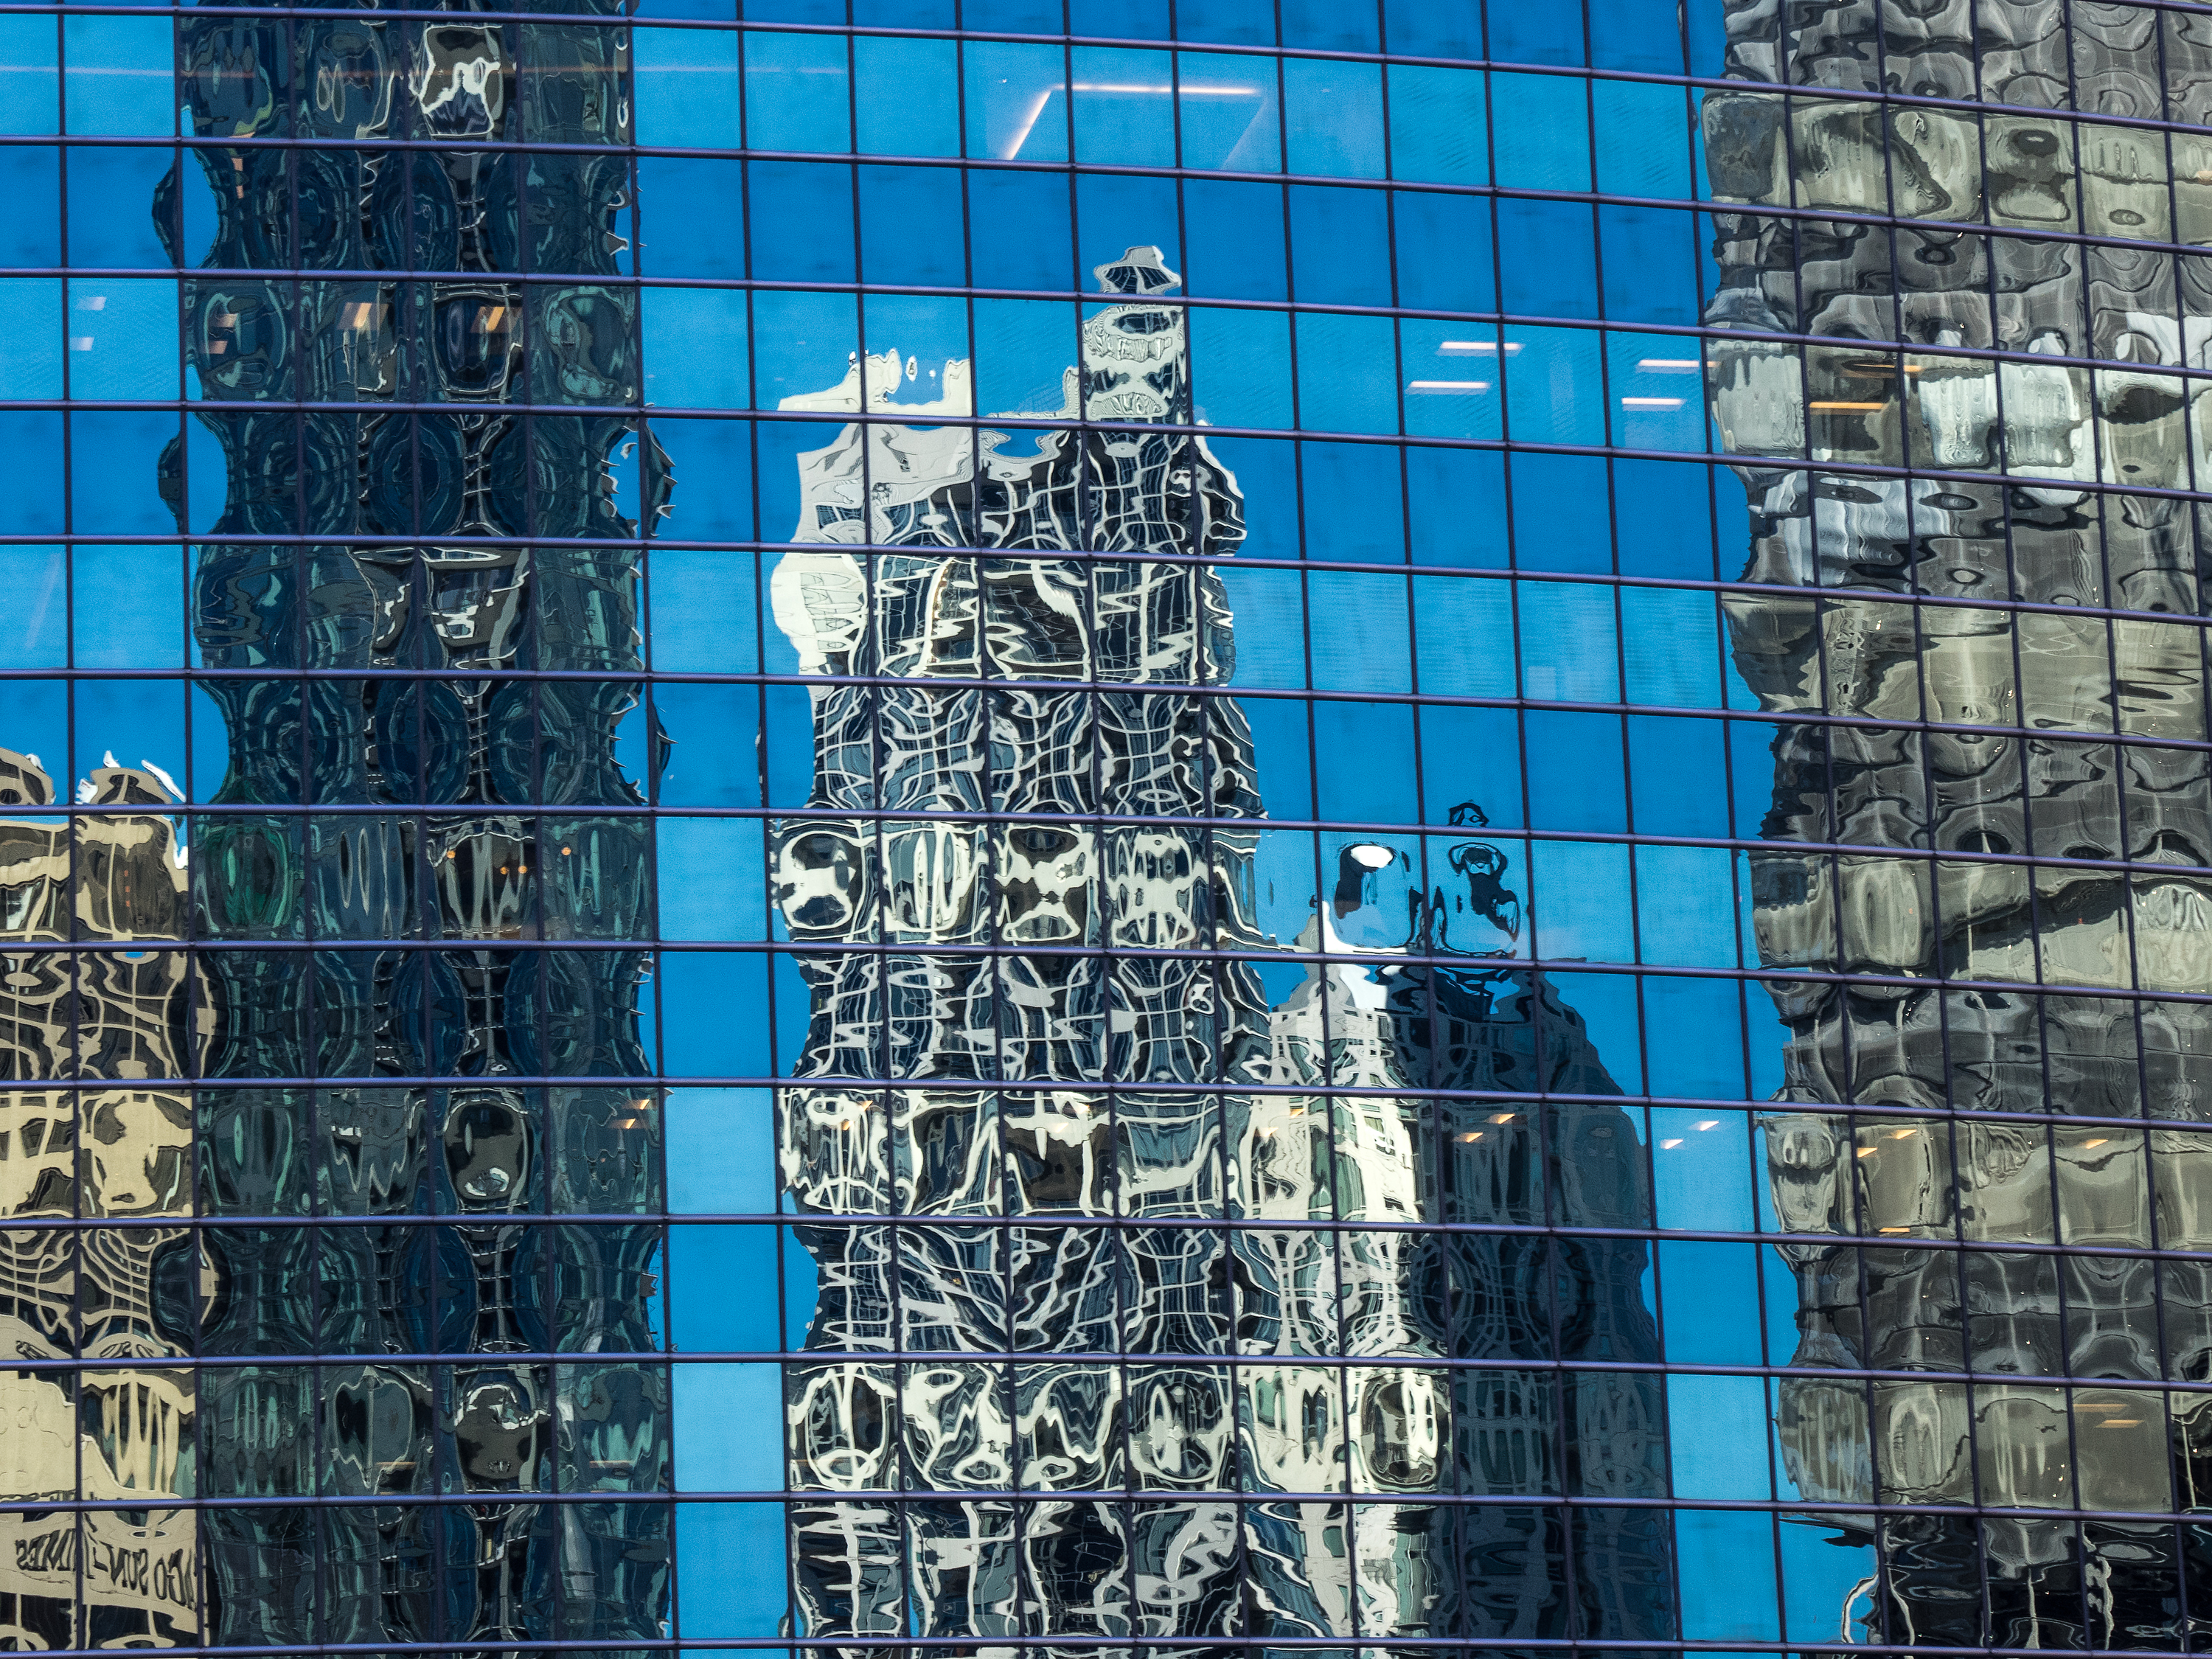 Buildings reflected in windows, Chicago (2015)